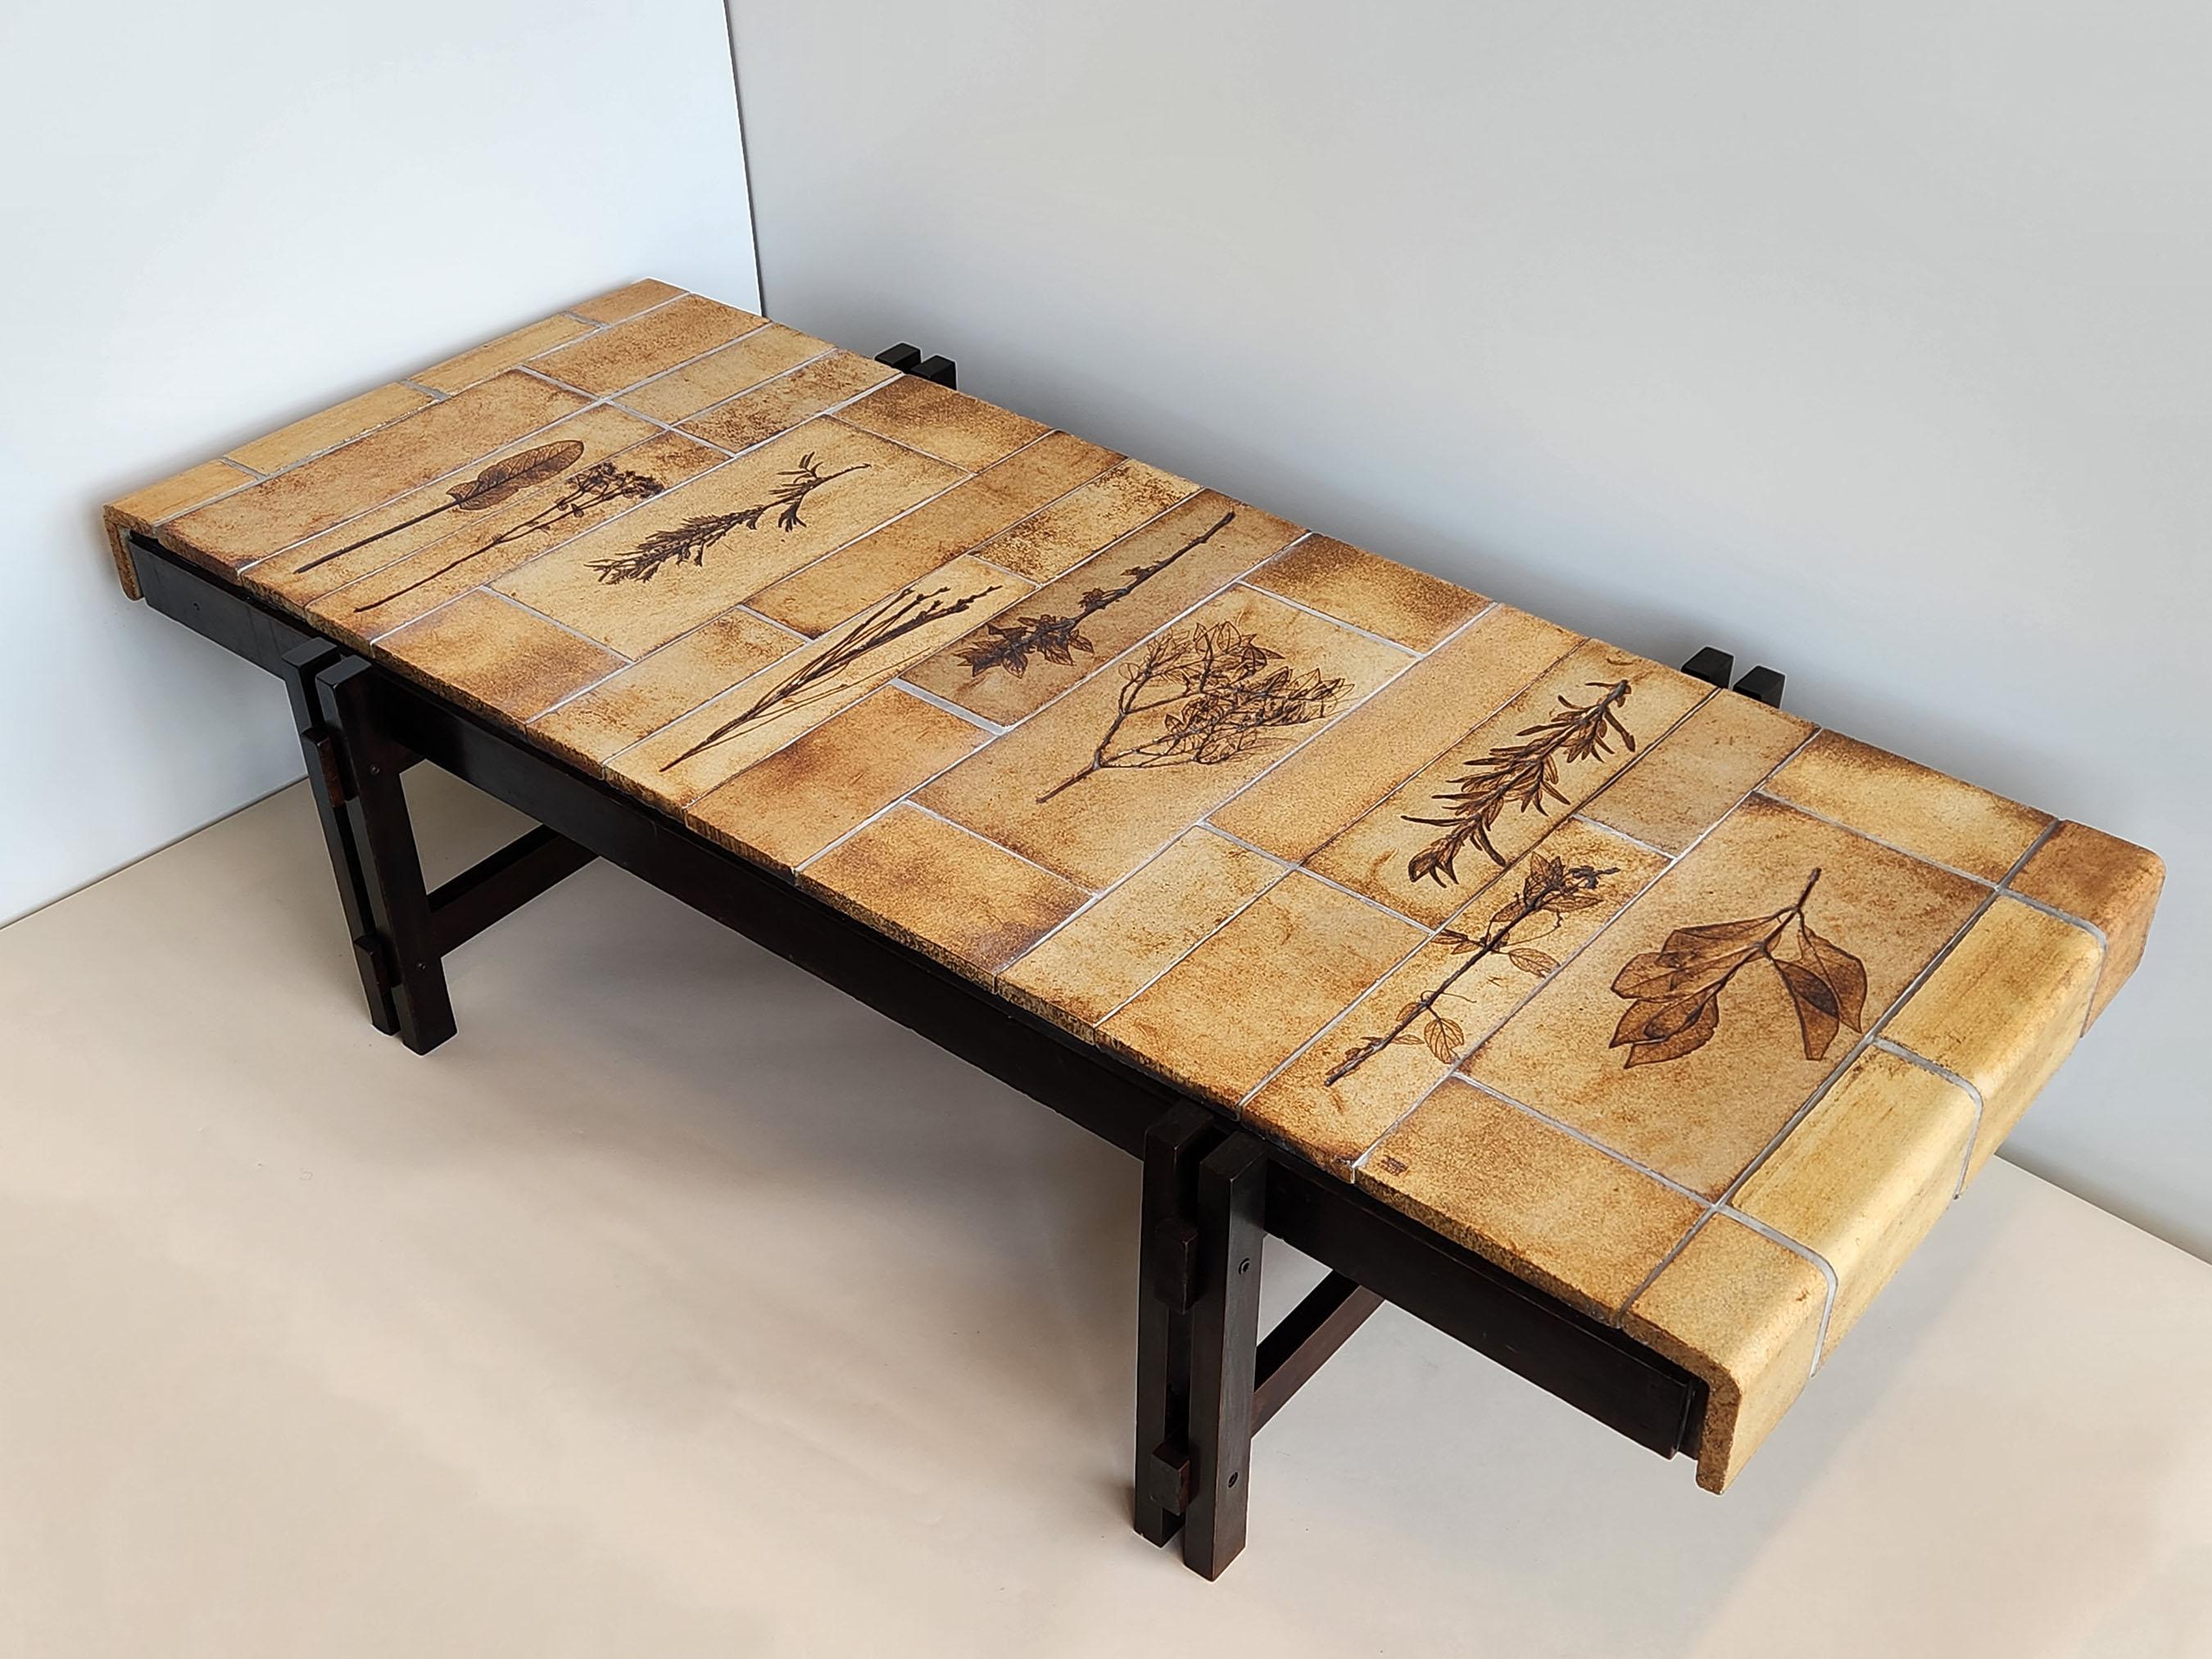 Mid-Century Modern Roger Capron - Large Coffee Table with Garrigue Tiles on Wood Frame, 1970s For Sale